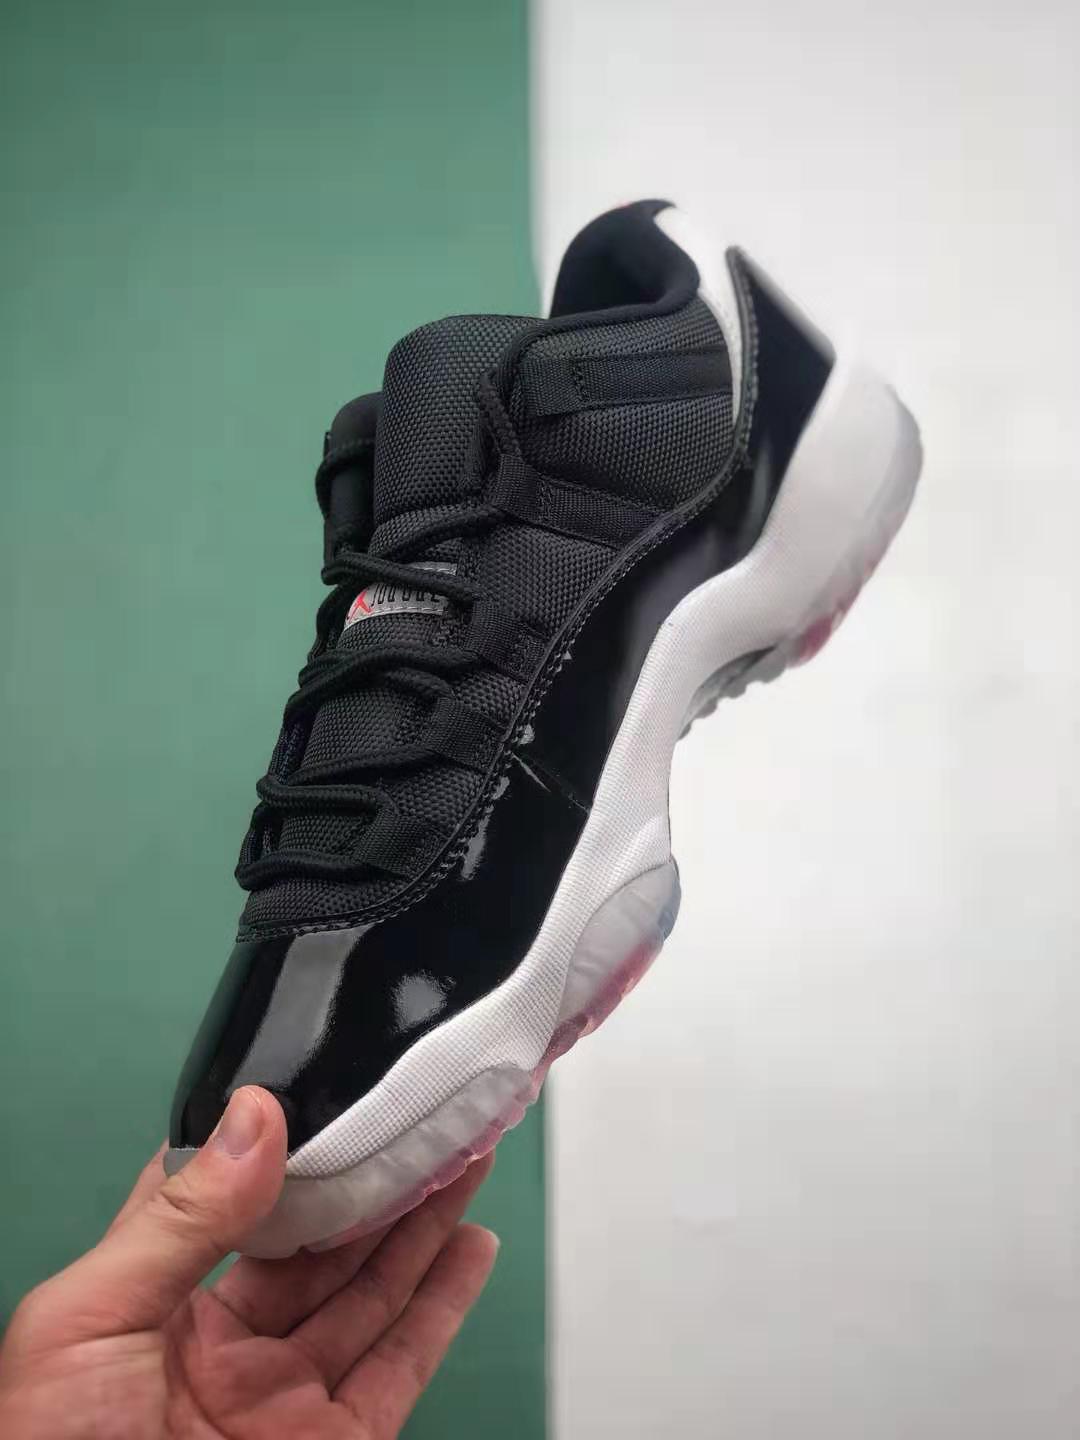 Air Jordan 11 Retro Low 'Infrared 23' 528895-023 - Stylish and Iconic Sneakers